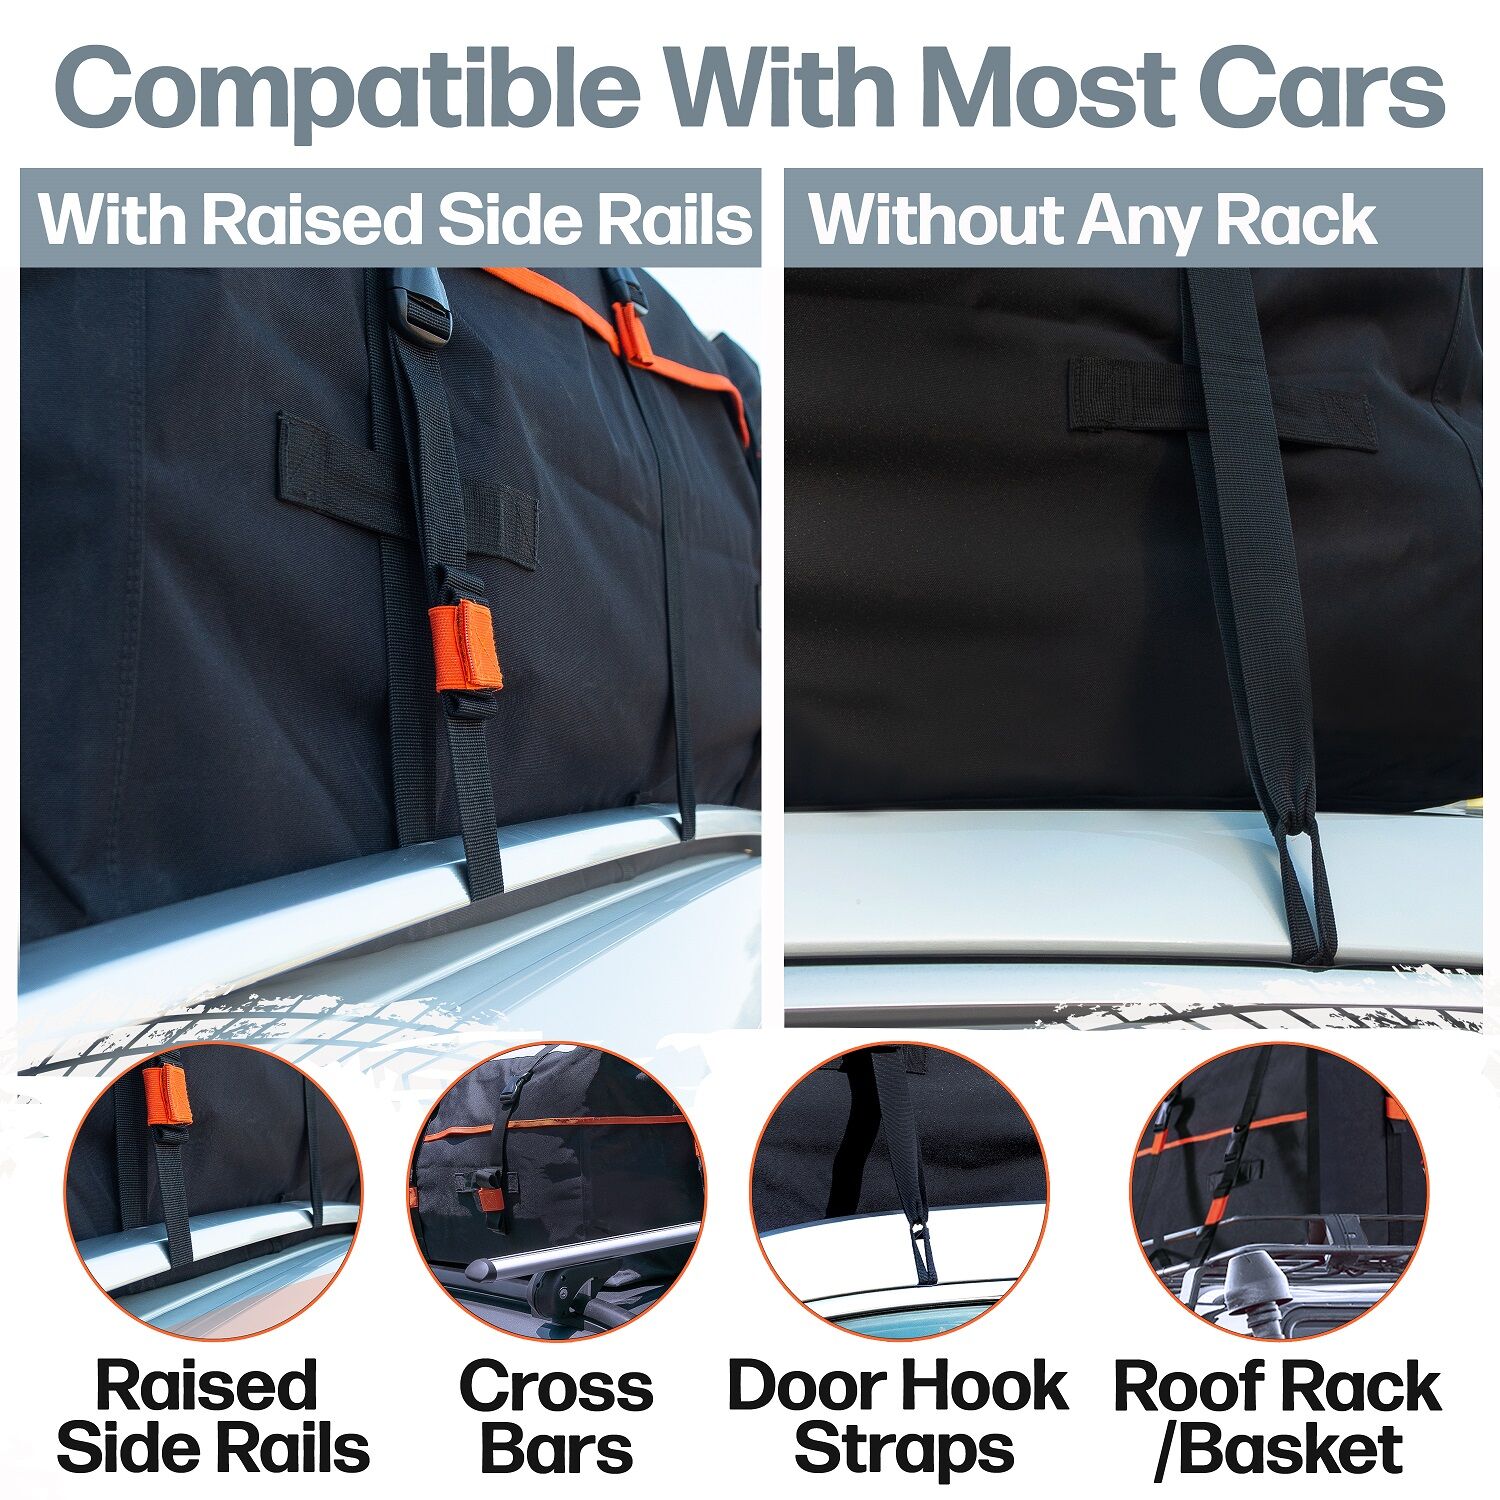 Large Cargo Bag for Car Without a Roof Rack | RoofPax